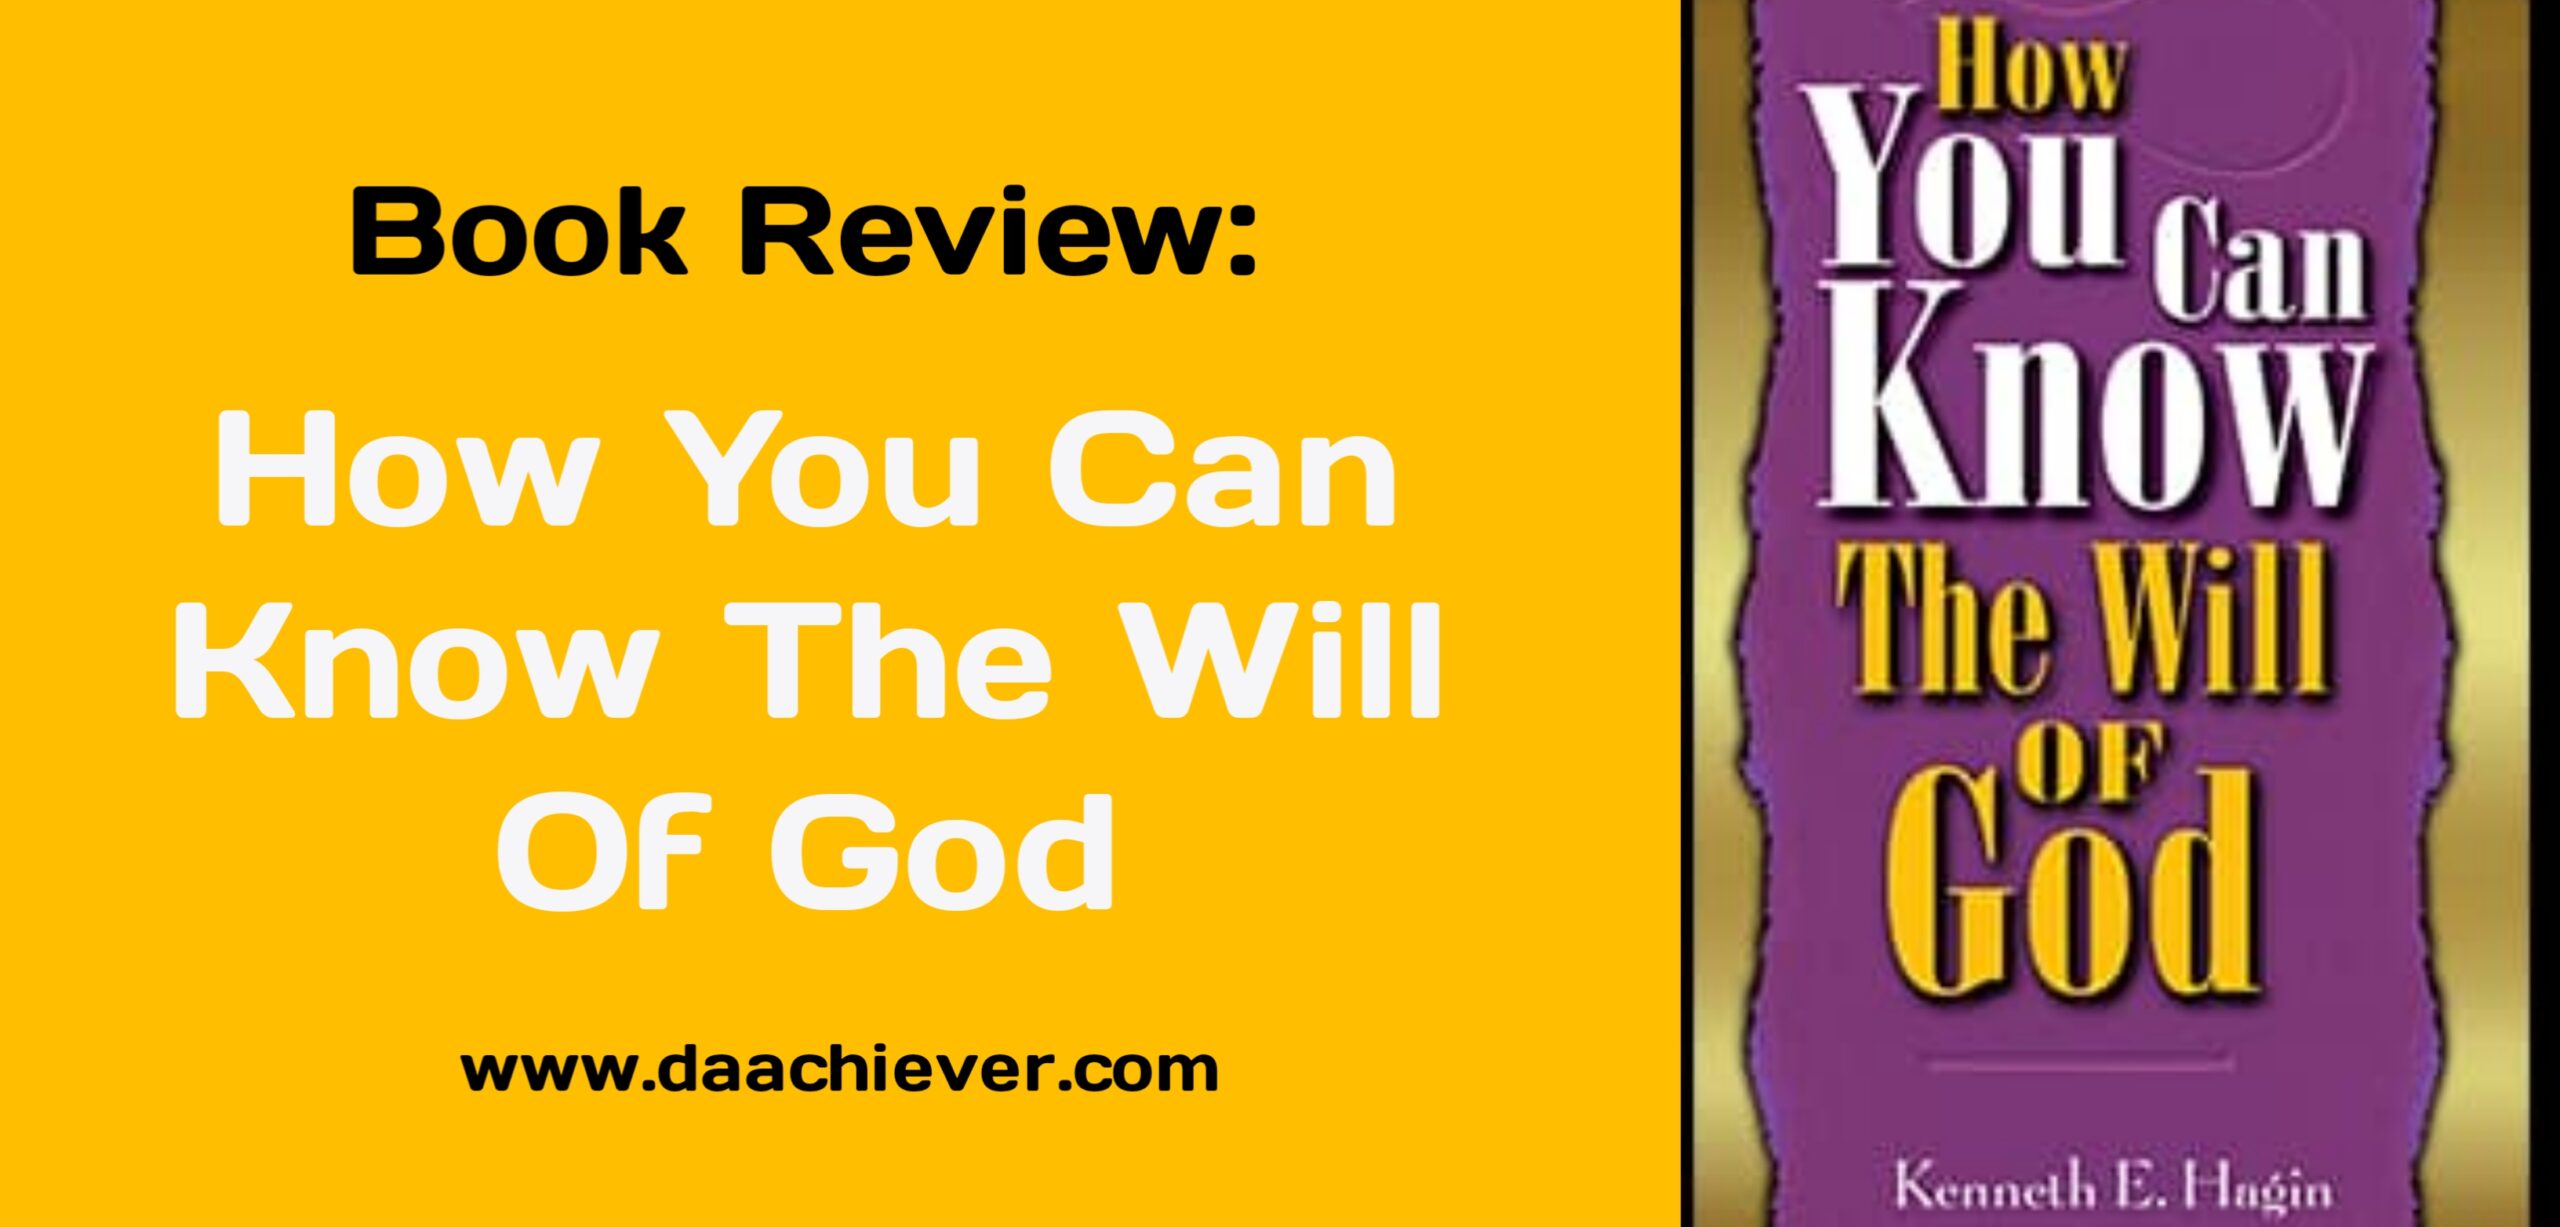 Kenneth Hagin book review